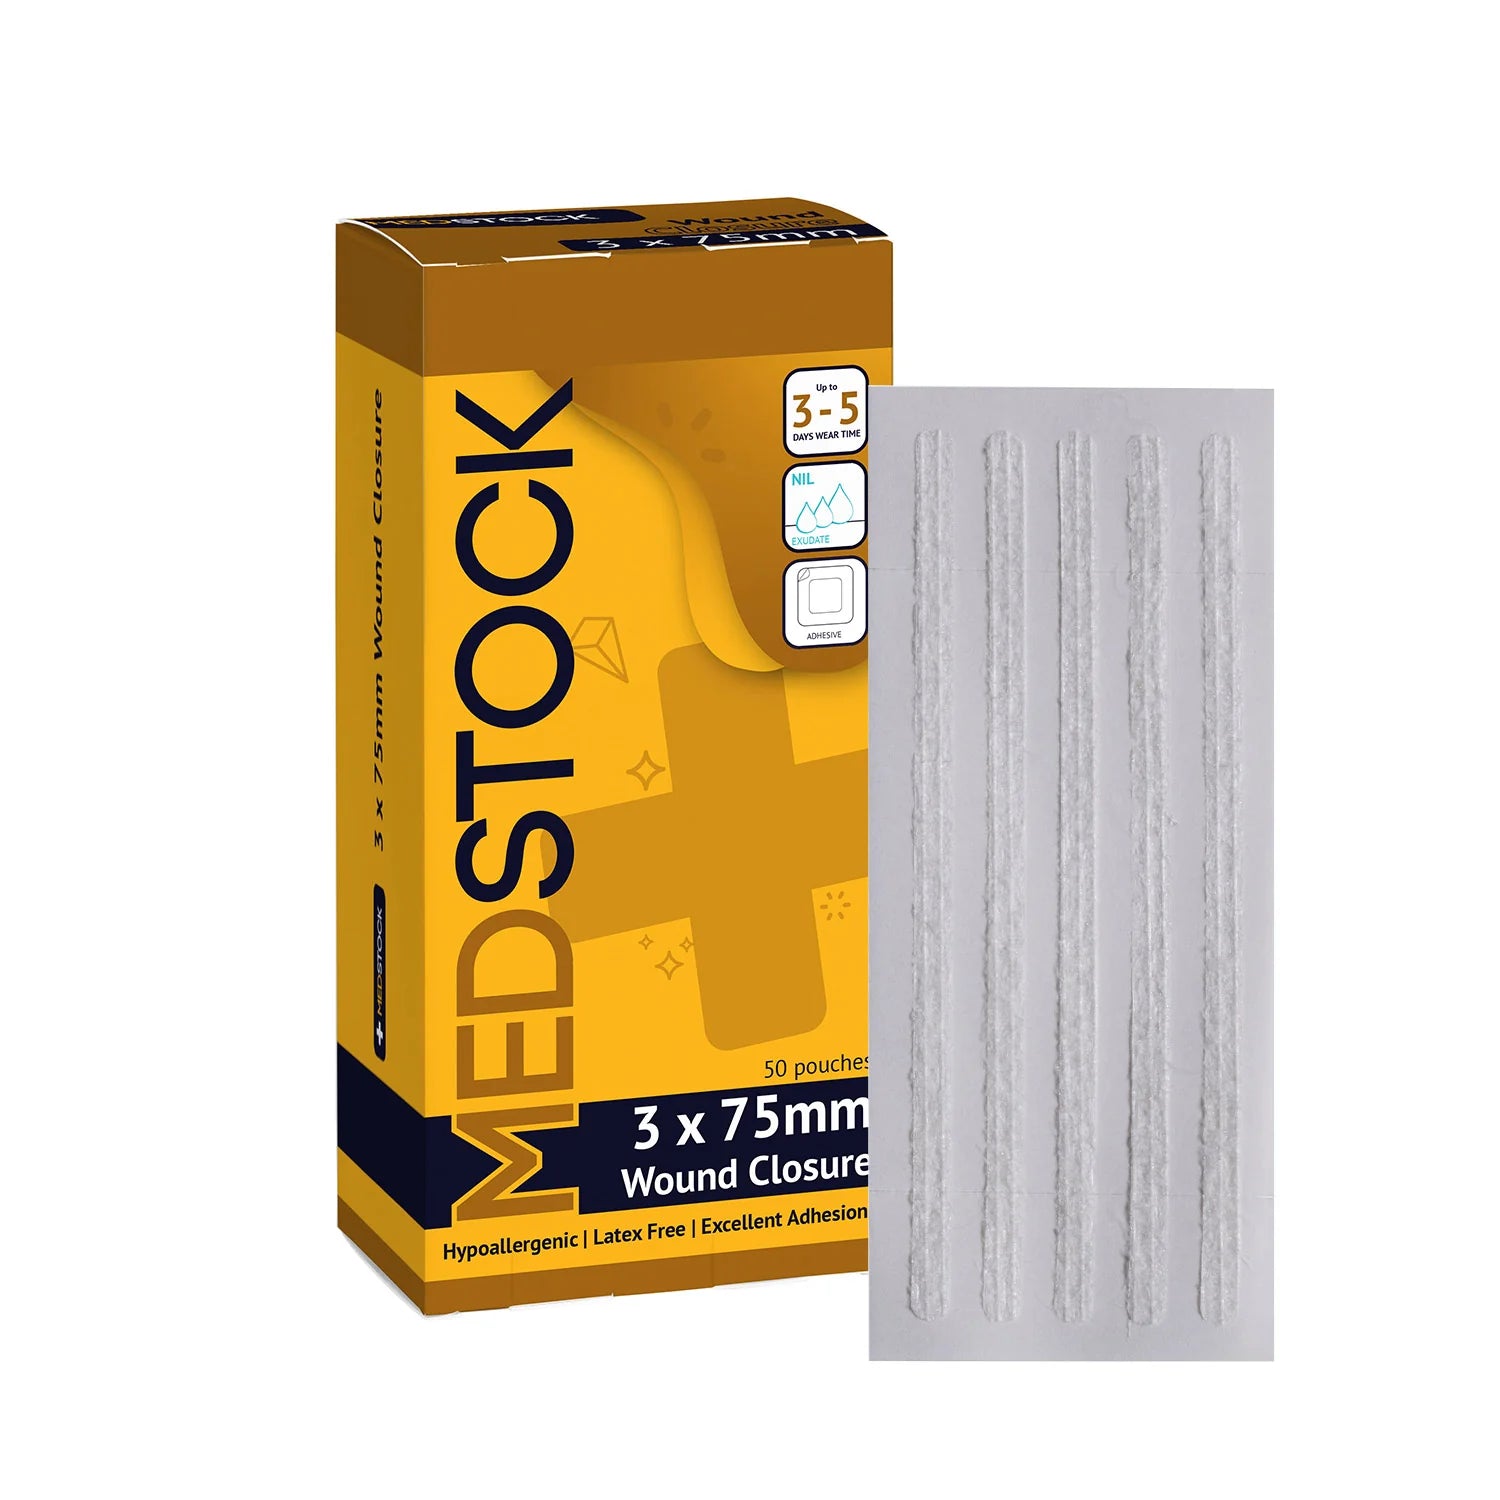 Medstock Wound Closure -Box Of 50